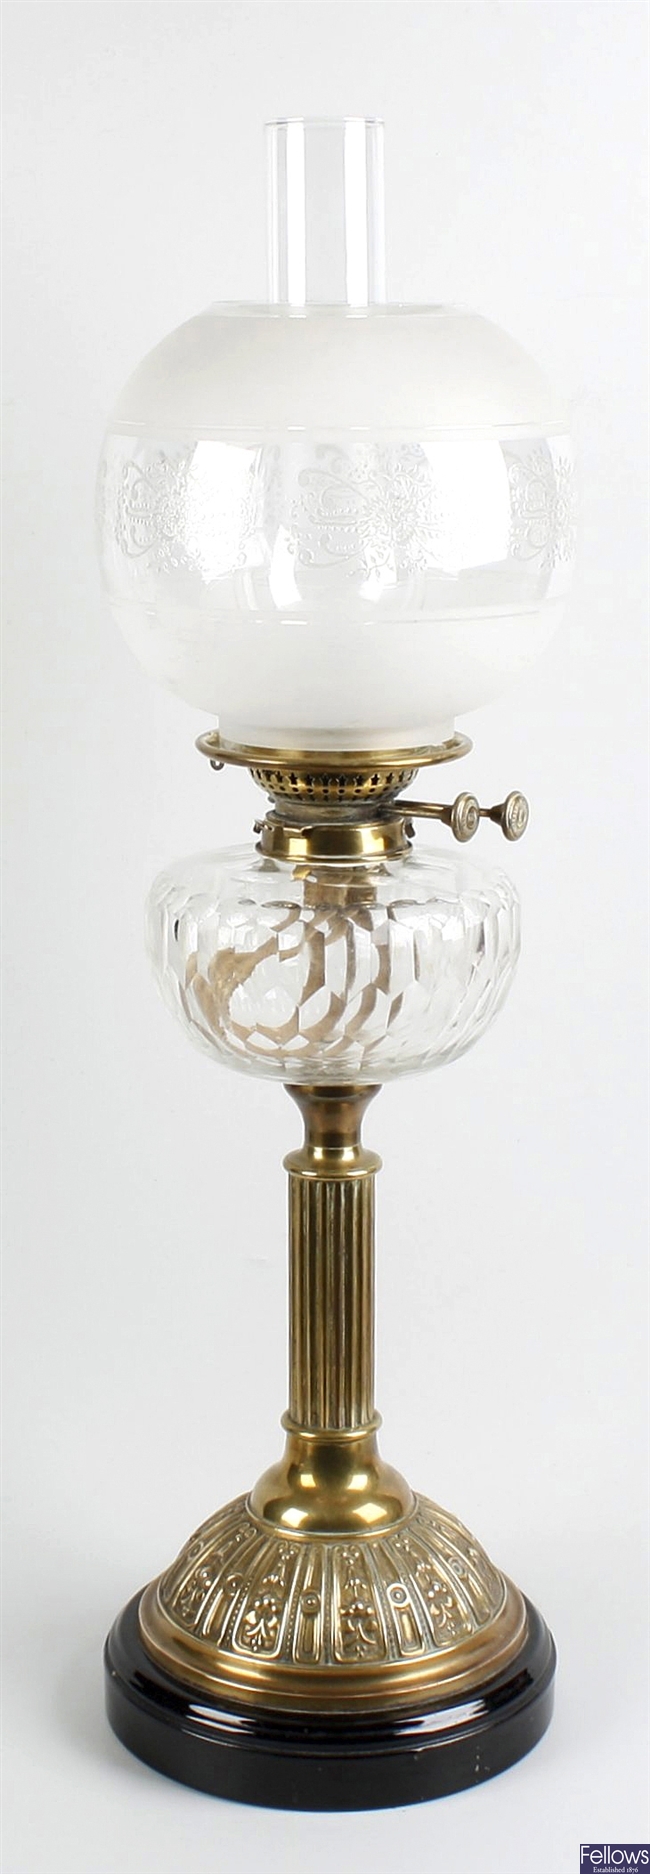 19th Century Brass Ship Lantern with Magnifying Glass Shade